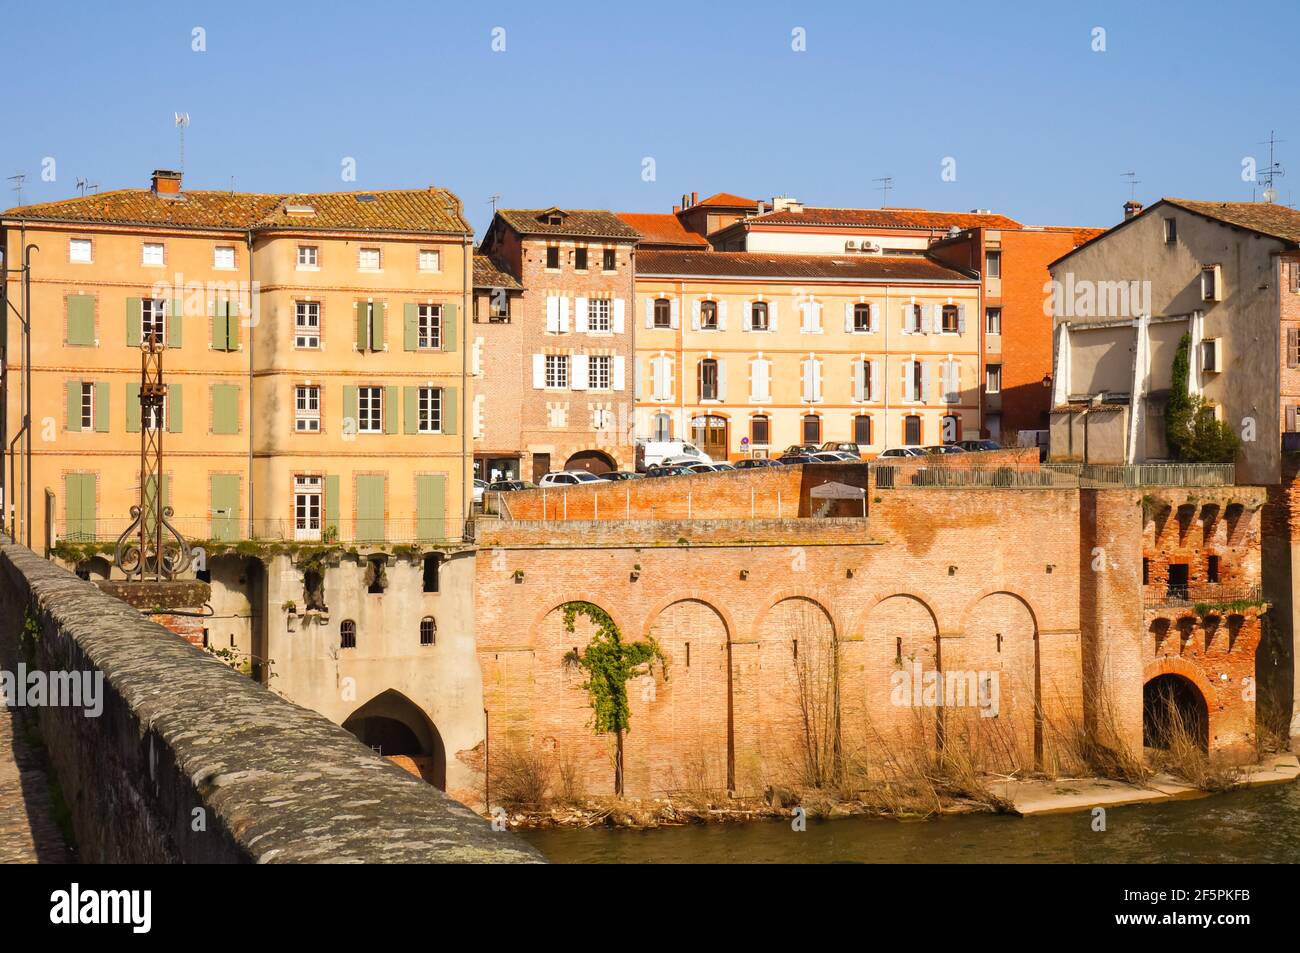 Medieval cityscape in Albi, 'the French Tuscany', in the South of France : old, typical townhouses built on the brick ramparts by the River Tarn Stock Photo